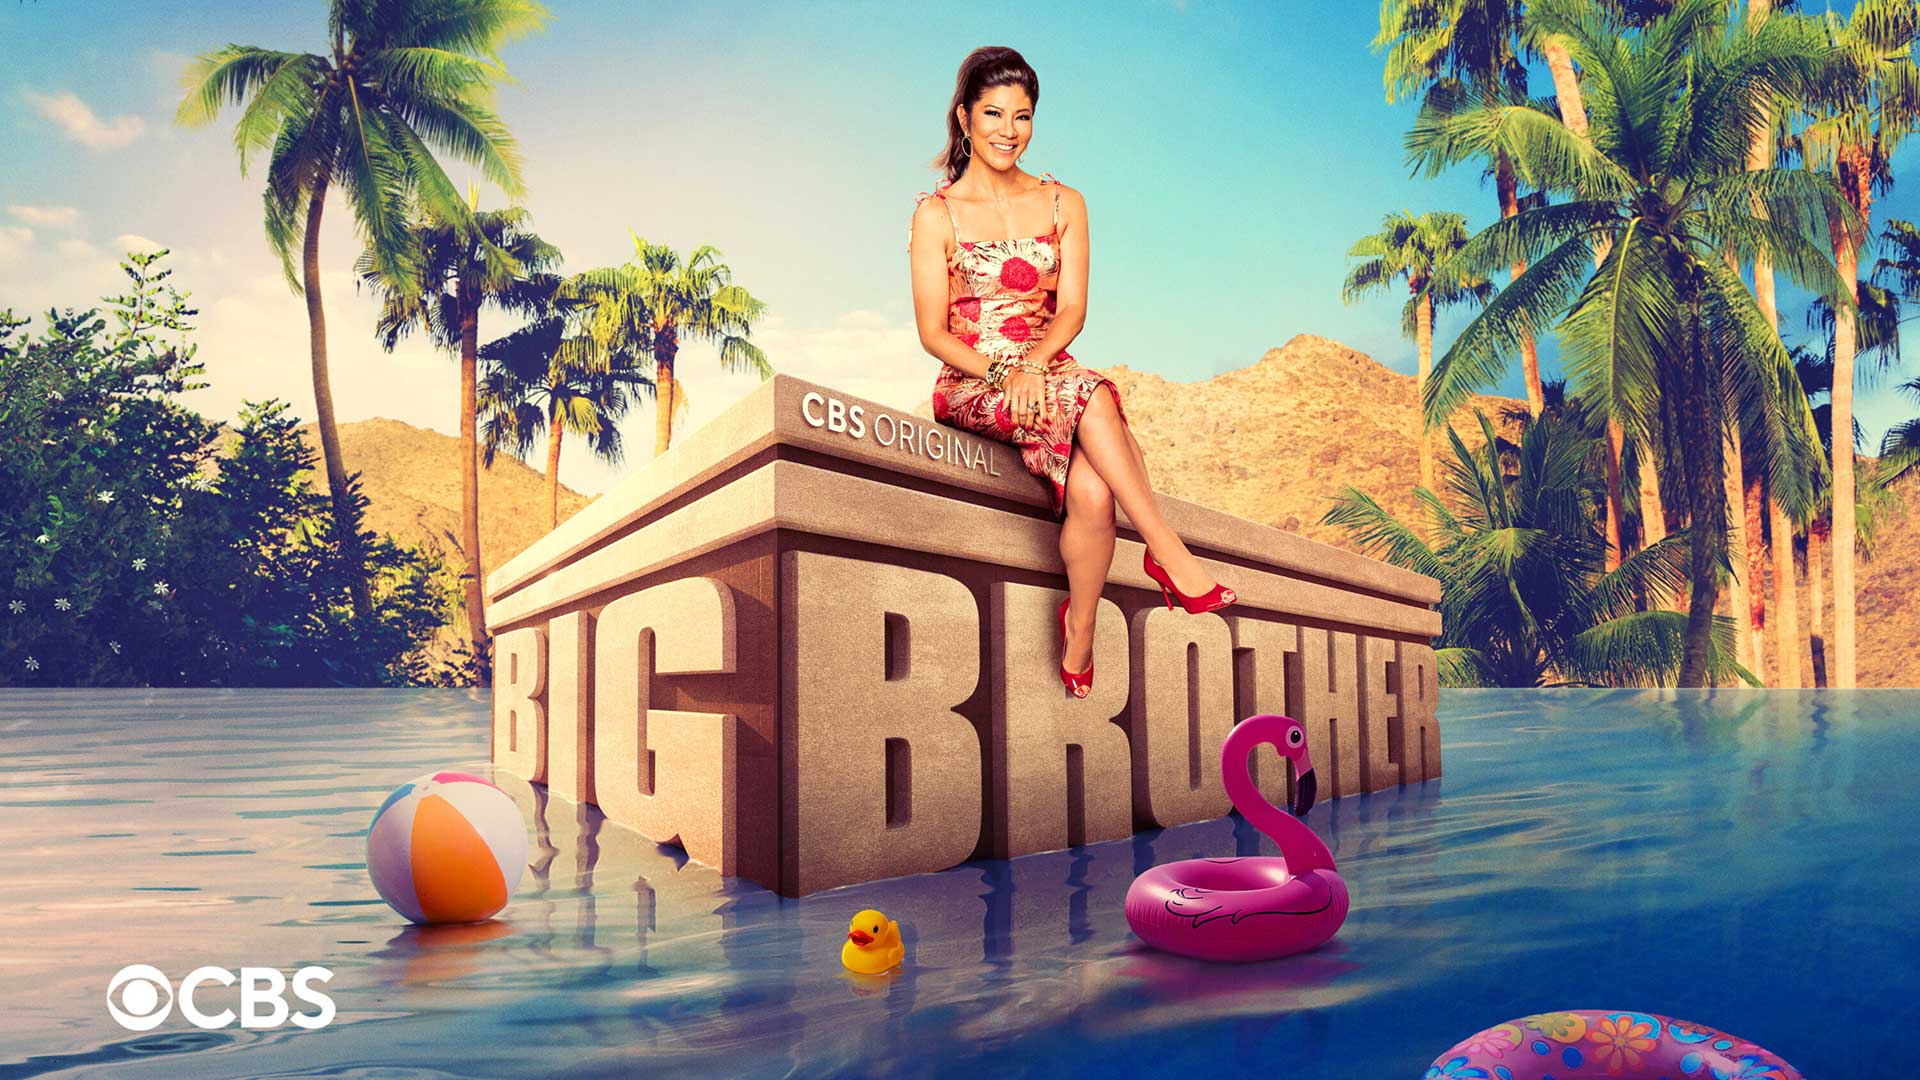 Watch all-new episodes of Big Brother Season 24 on Sundays and Wednesdays at 8/7c, and Thursdays at 9/8c, on CBS and streaming on Paramount+.